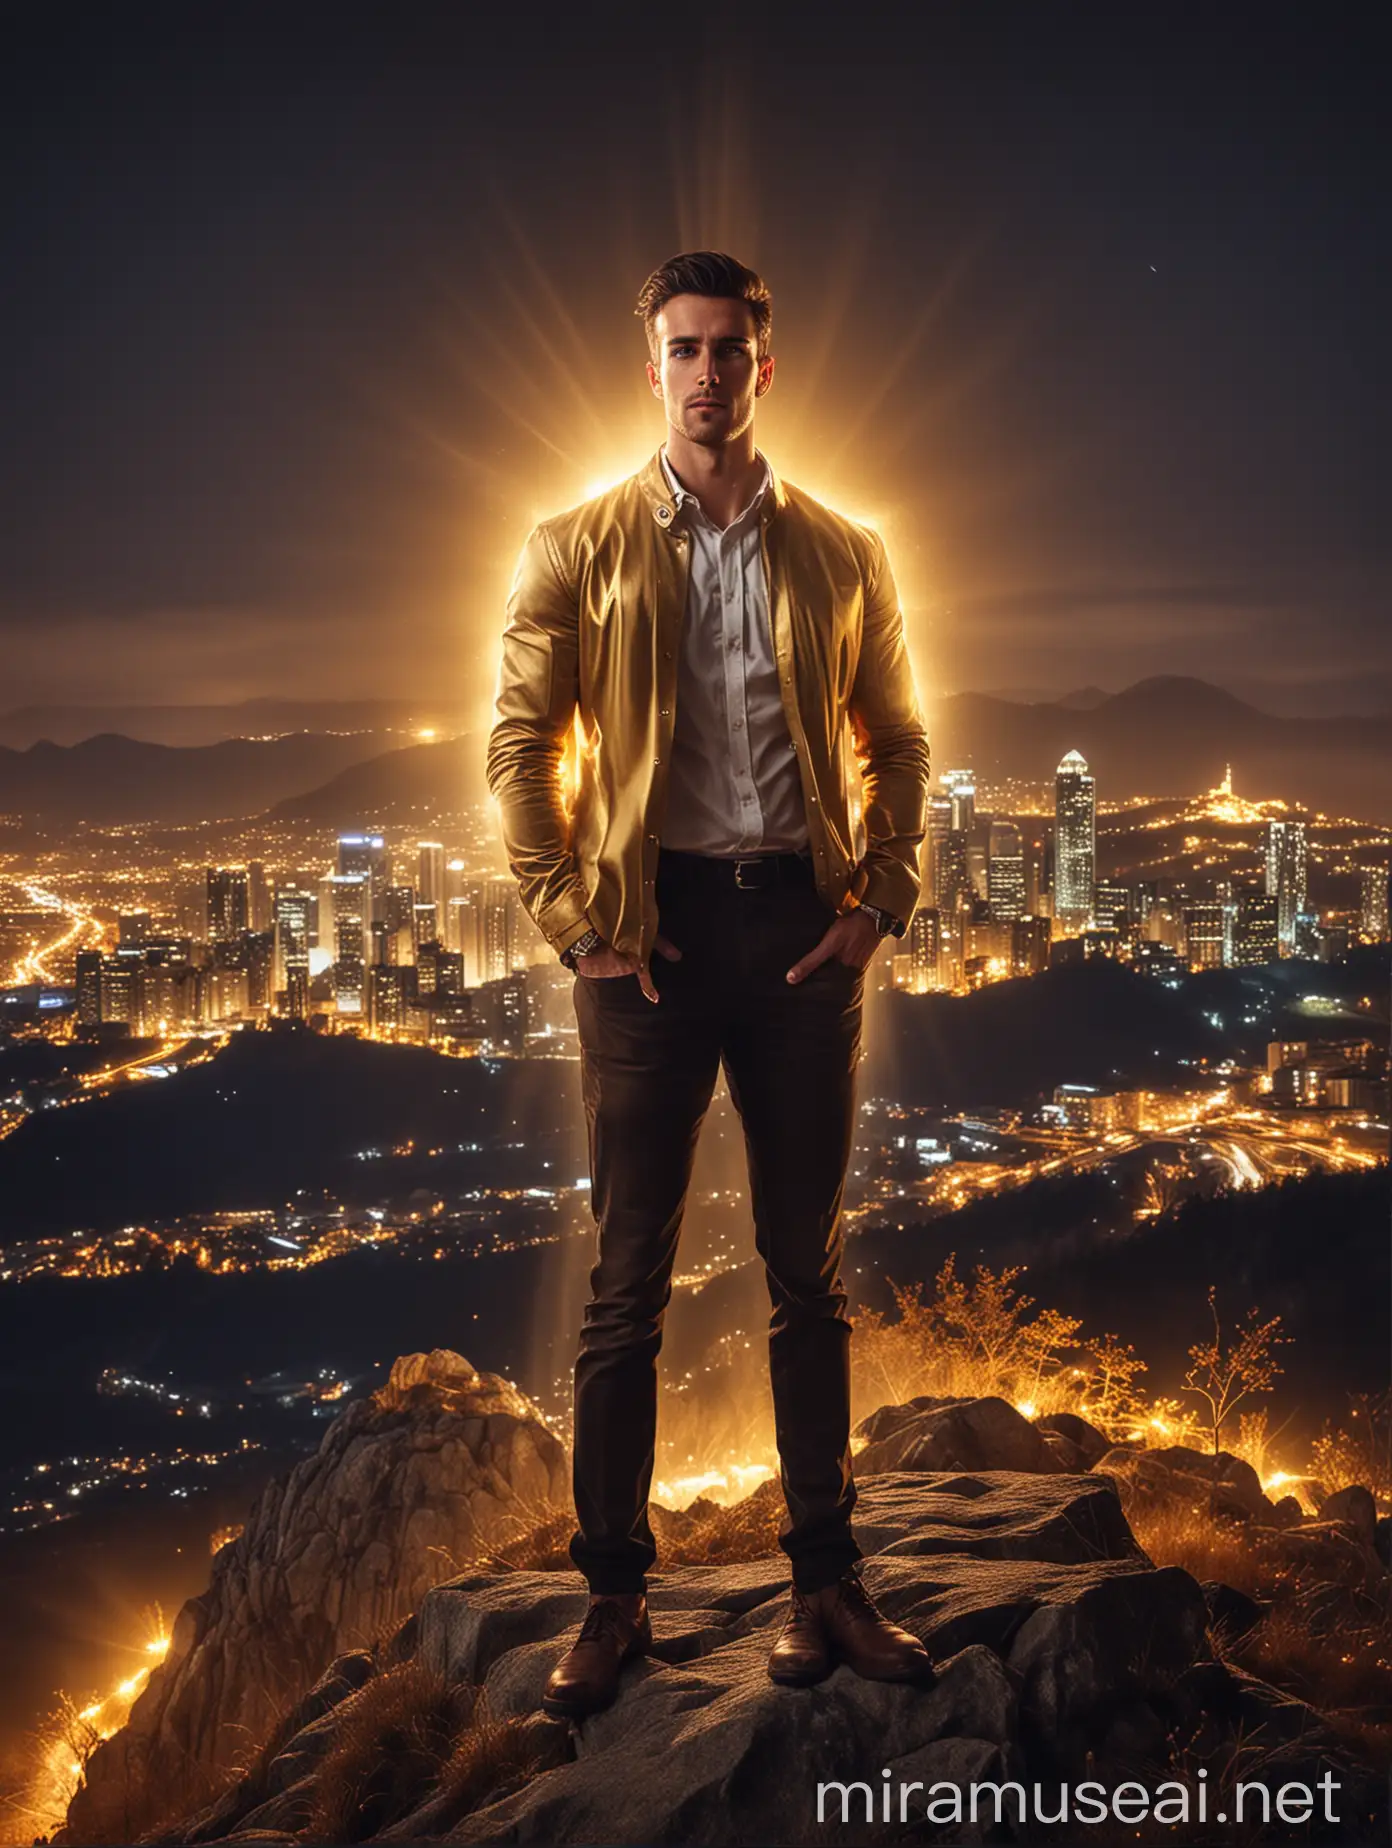 A handsome man surrounded by magical golden luminous light while standing on a mountain with light surrounding him, with a skyscraper behind him at midnight